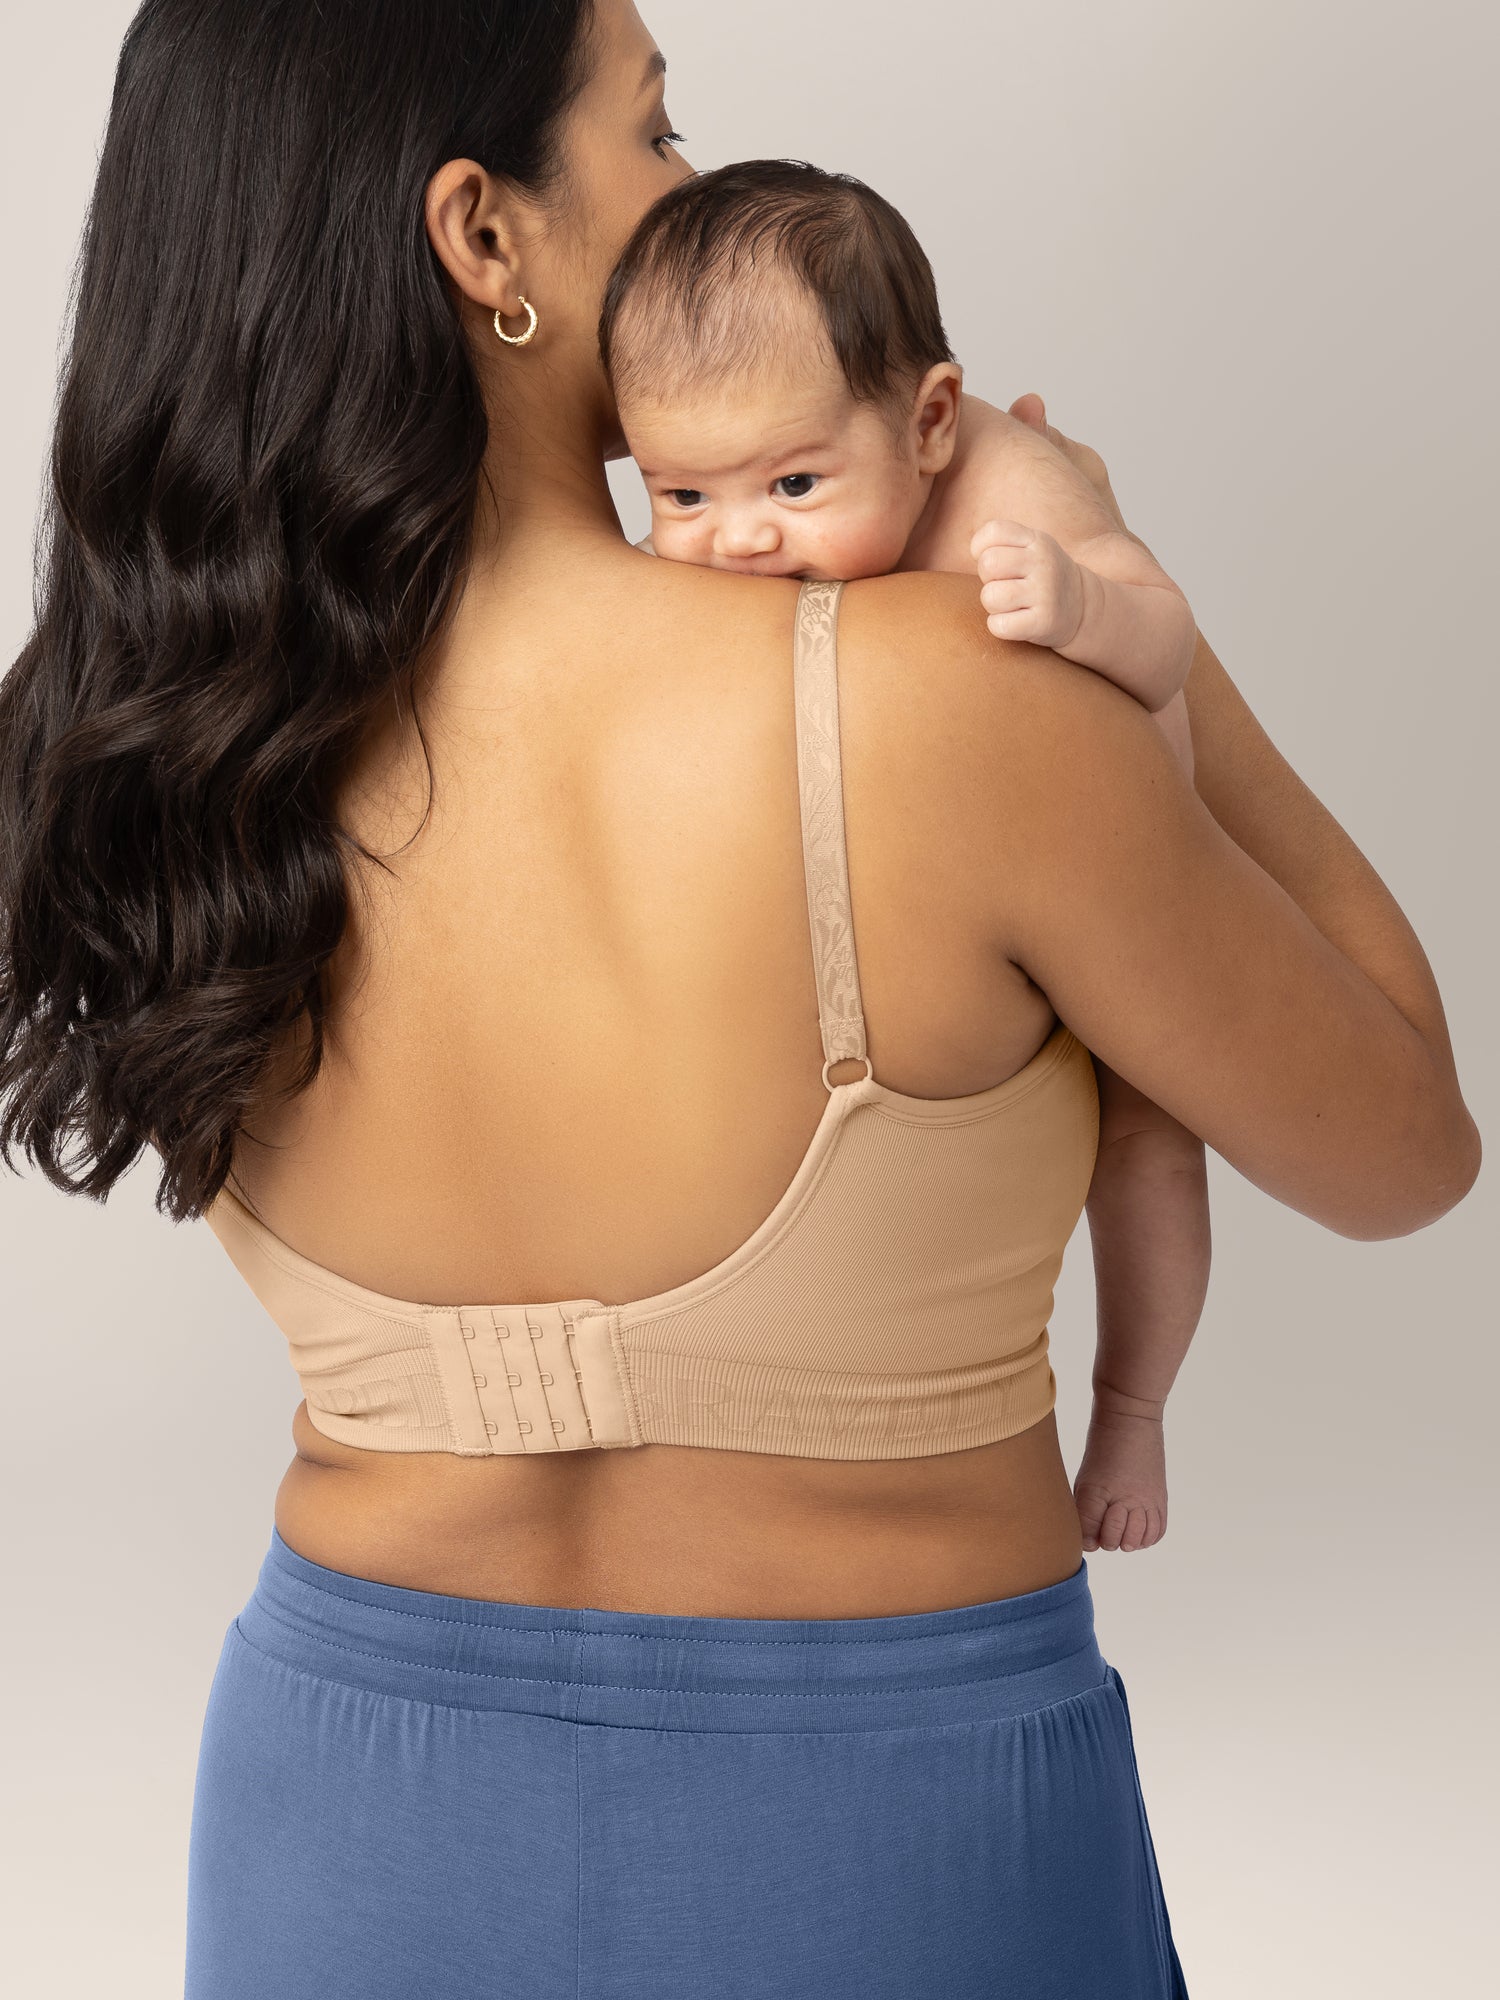 Kindred Bravely French Terry Racerback Busty Nursing Sleep Bra for E, F, g,  H, I cup Maternity Bra for Breastfeeding (X-Large-Busty, Soft Pink) on OnBuy